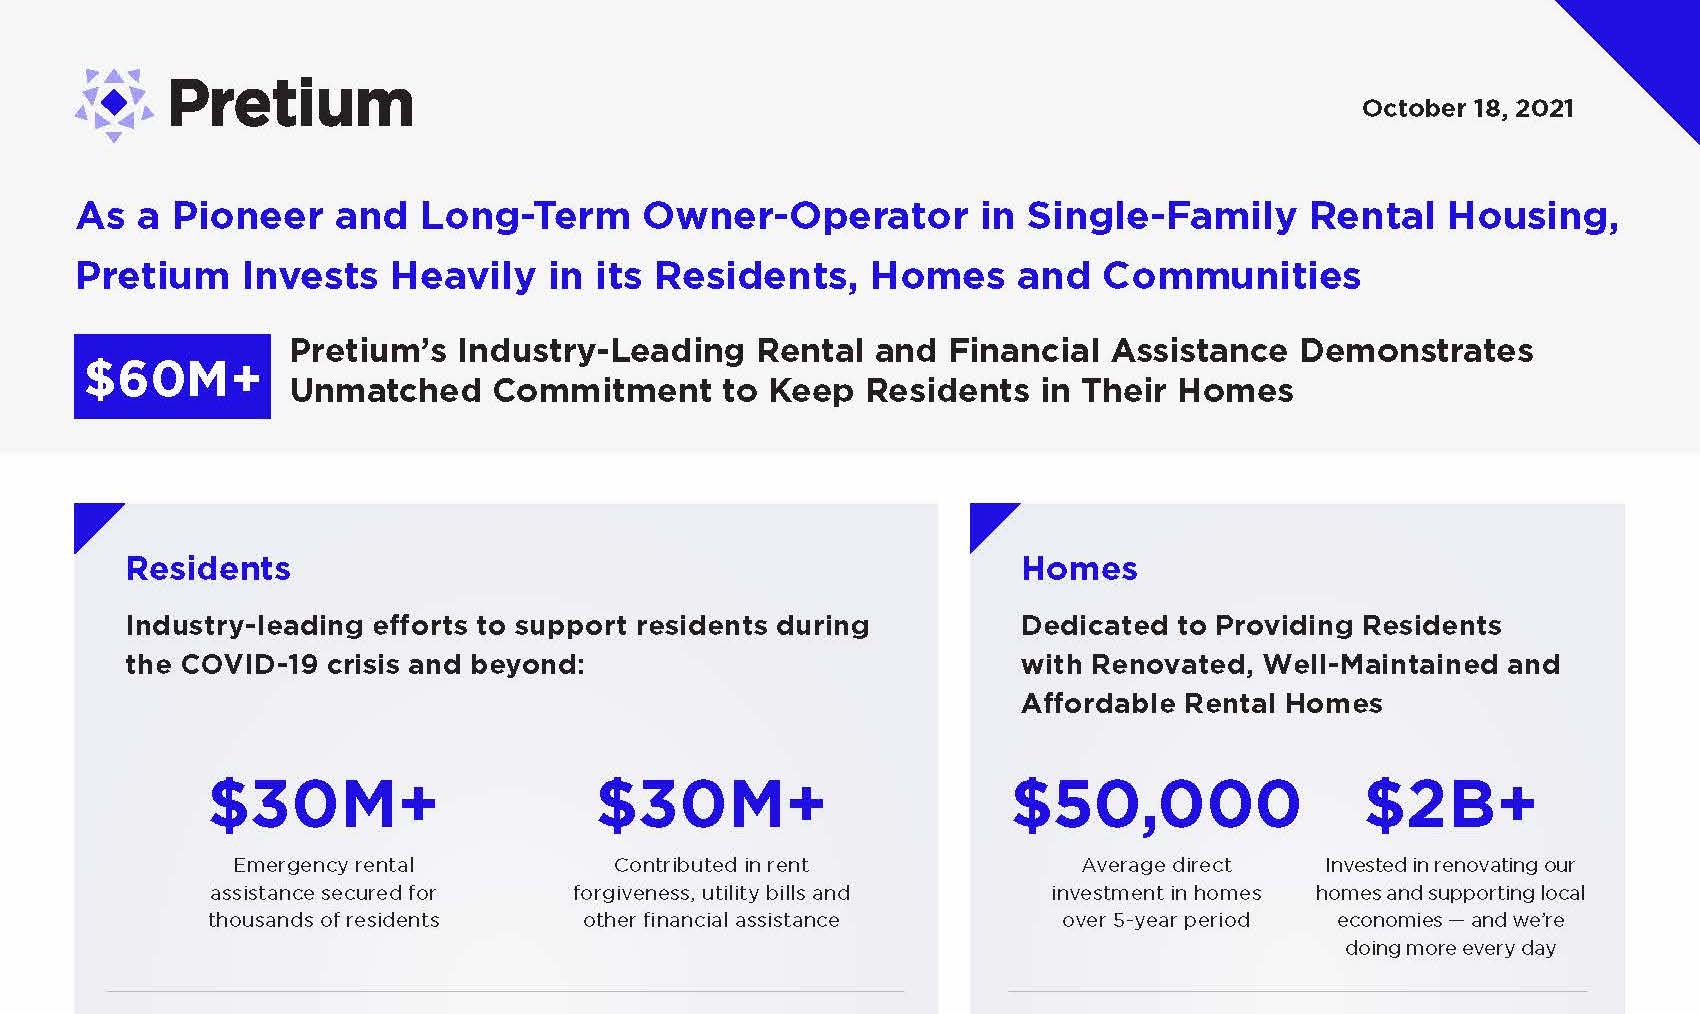 Pretium is a Pioneer and Long-Term Owner-Operator in Single-Family Rental Housing